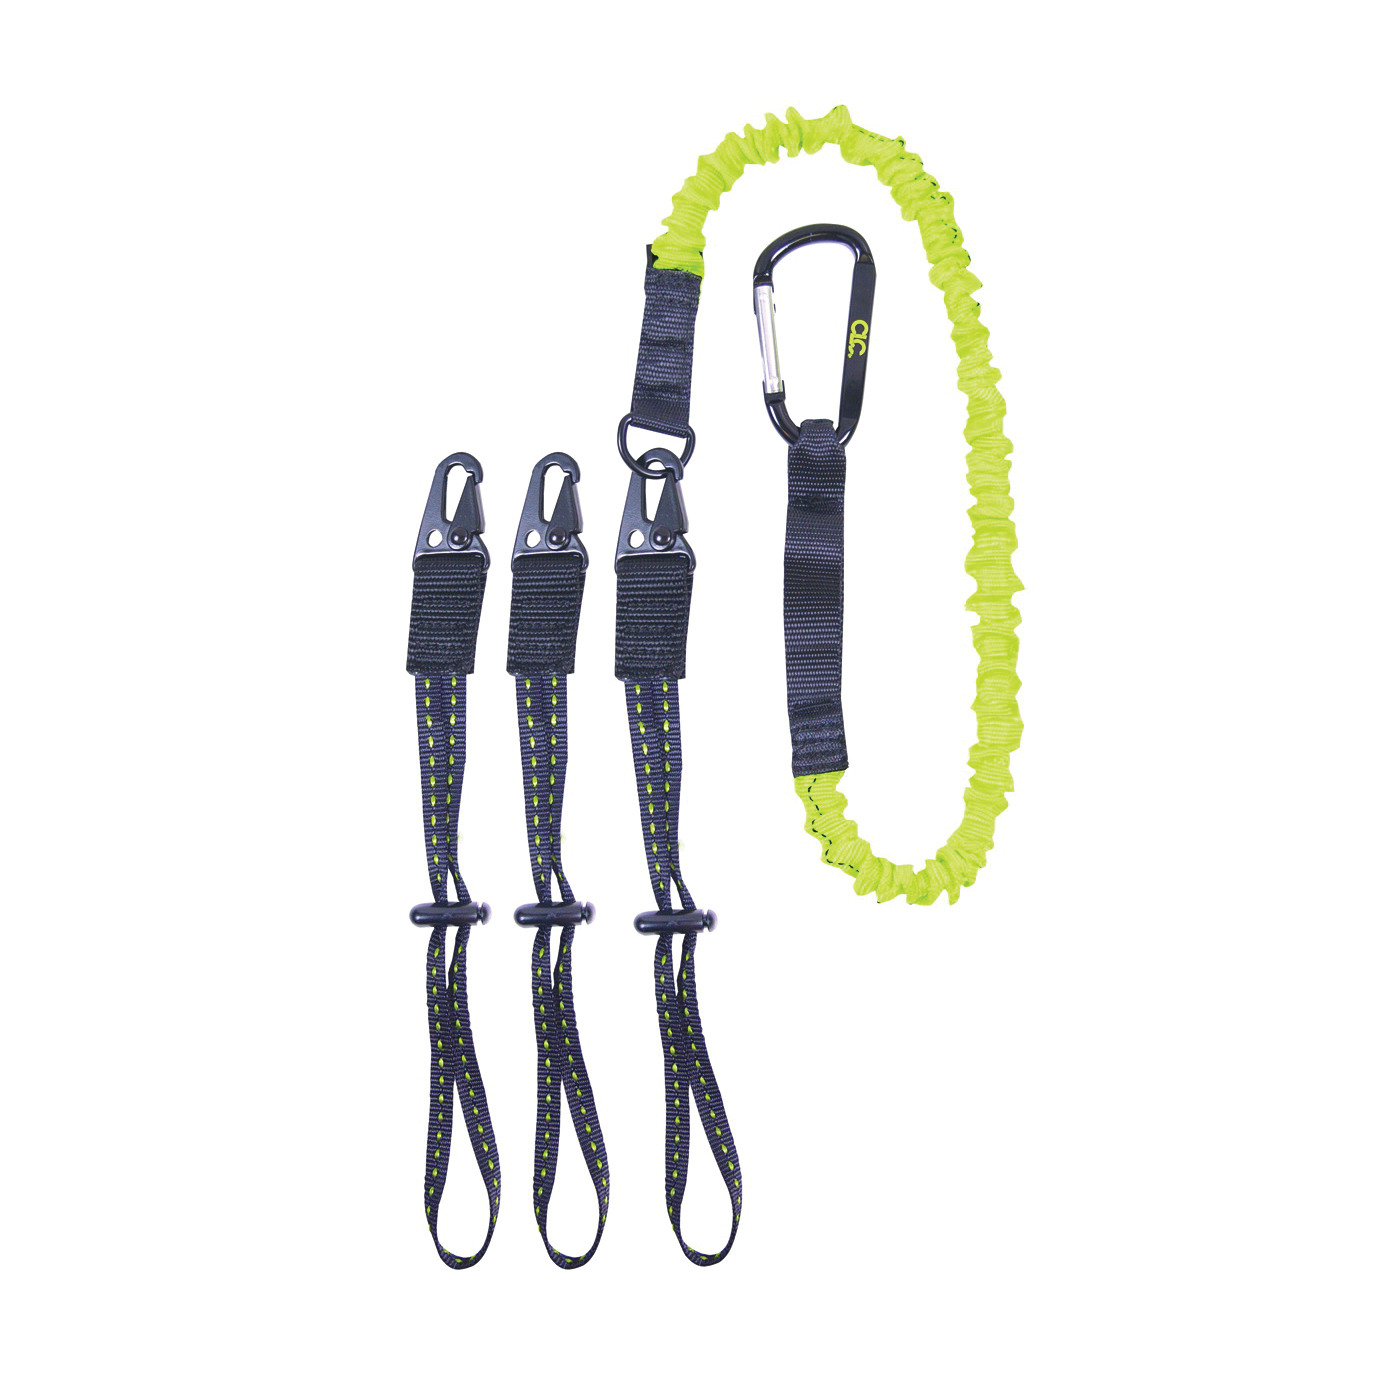 CLC GEAR LINK 1025 Interchangeable End Tool Lanyard, 41 to 56 in L, 6 lb Working Load, Carabiner End Fitting - 1